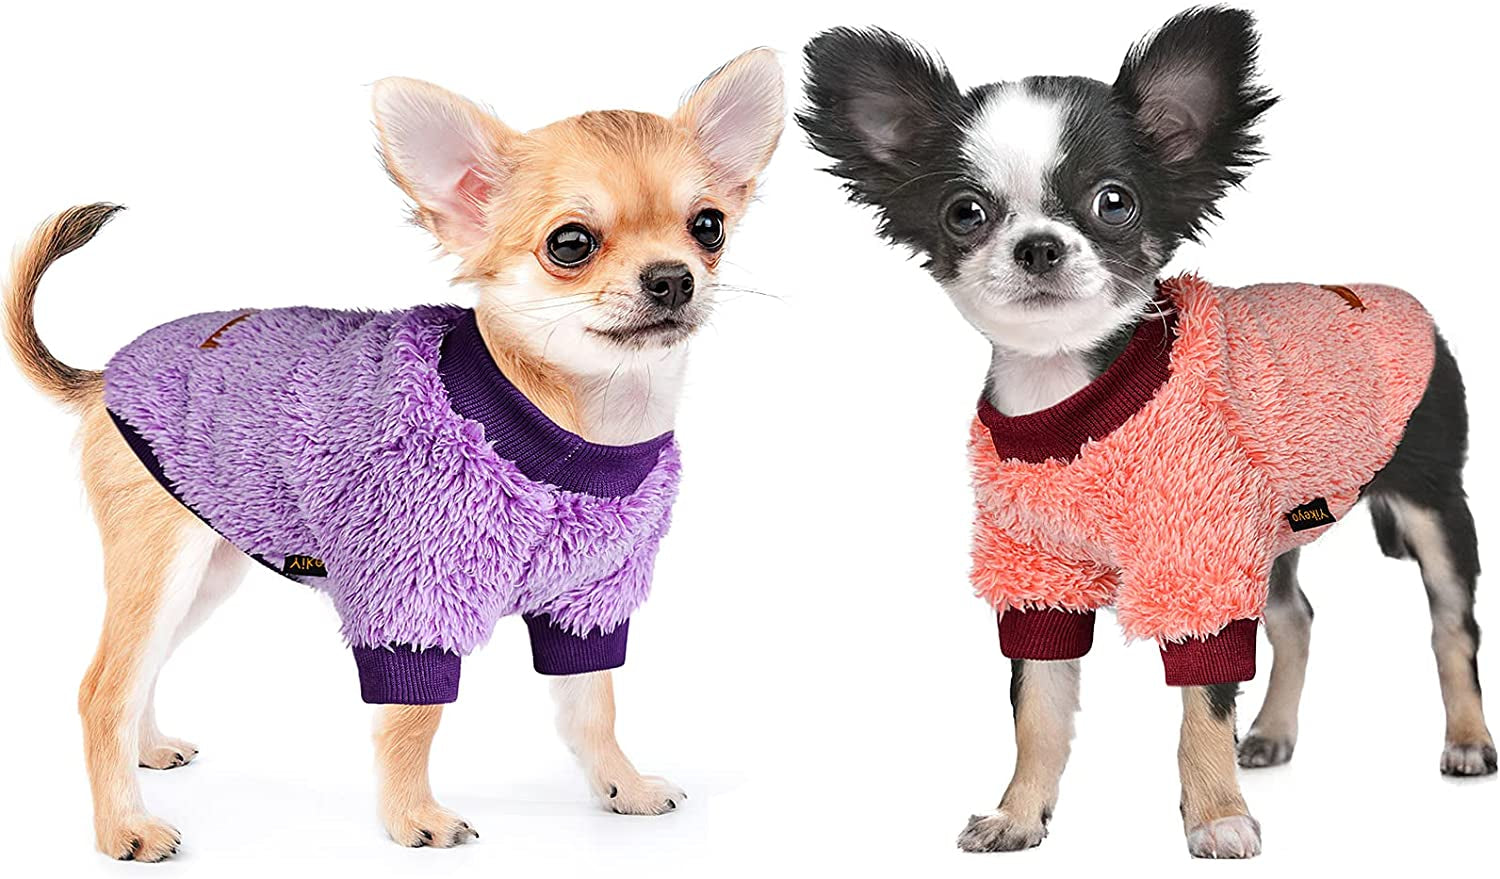 CHBORLESS Dog Sweater Puppy Dress: Warm Pet Small Dogs Clothes